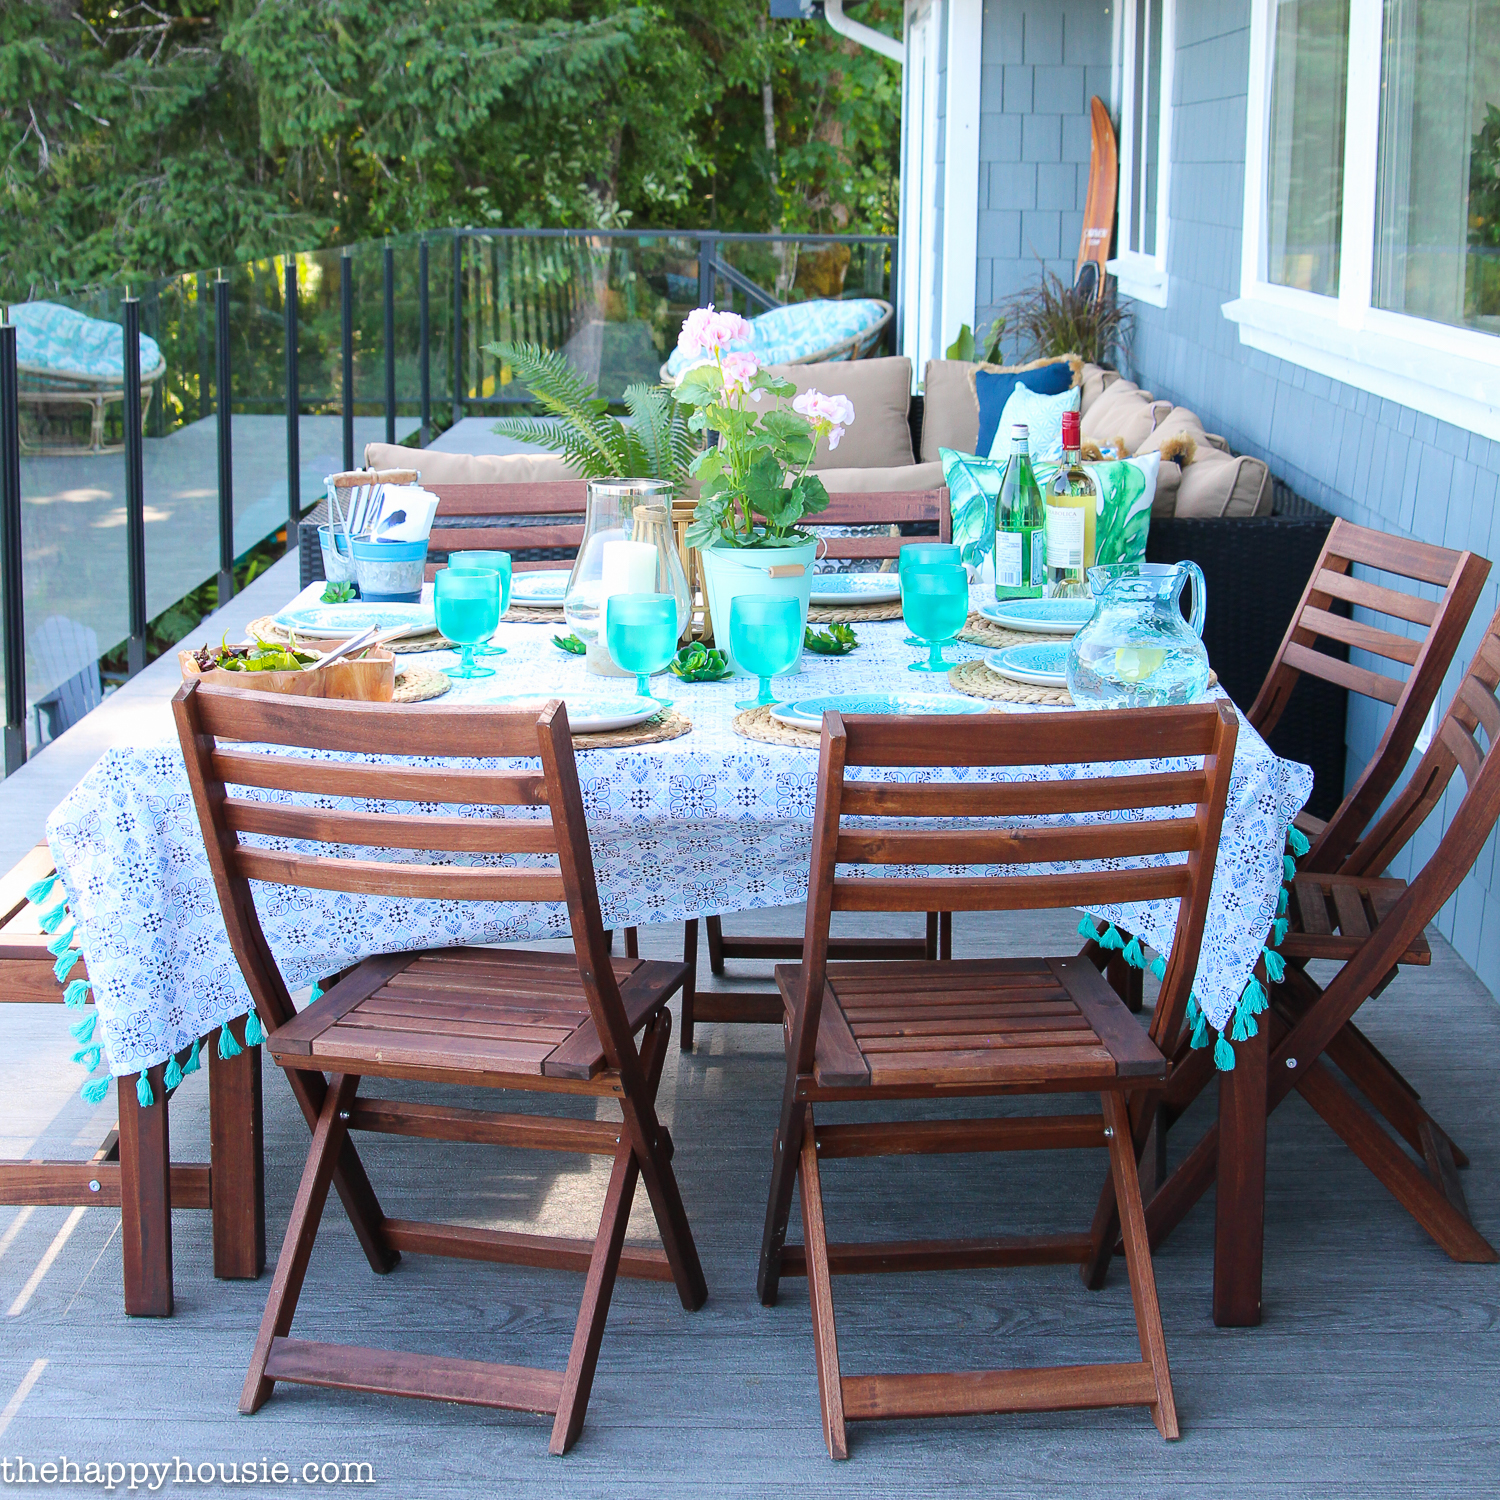 A table set for eating on the porch.